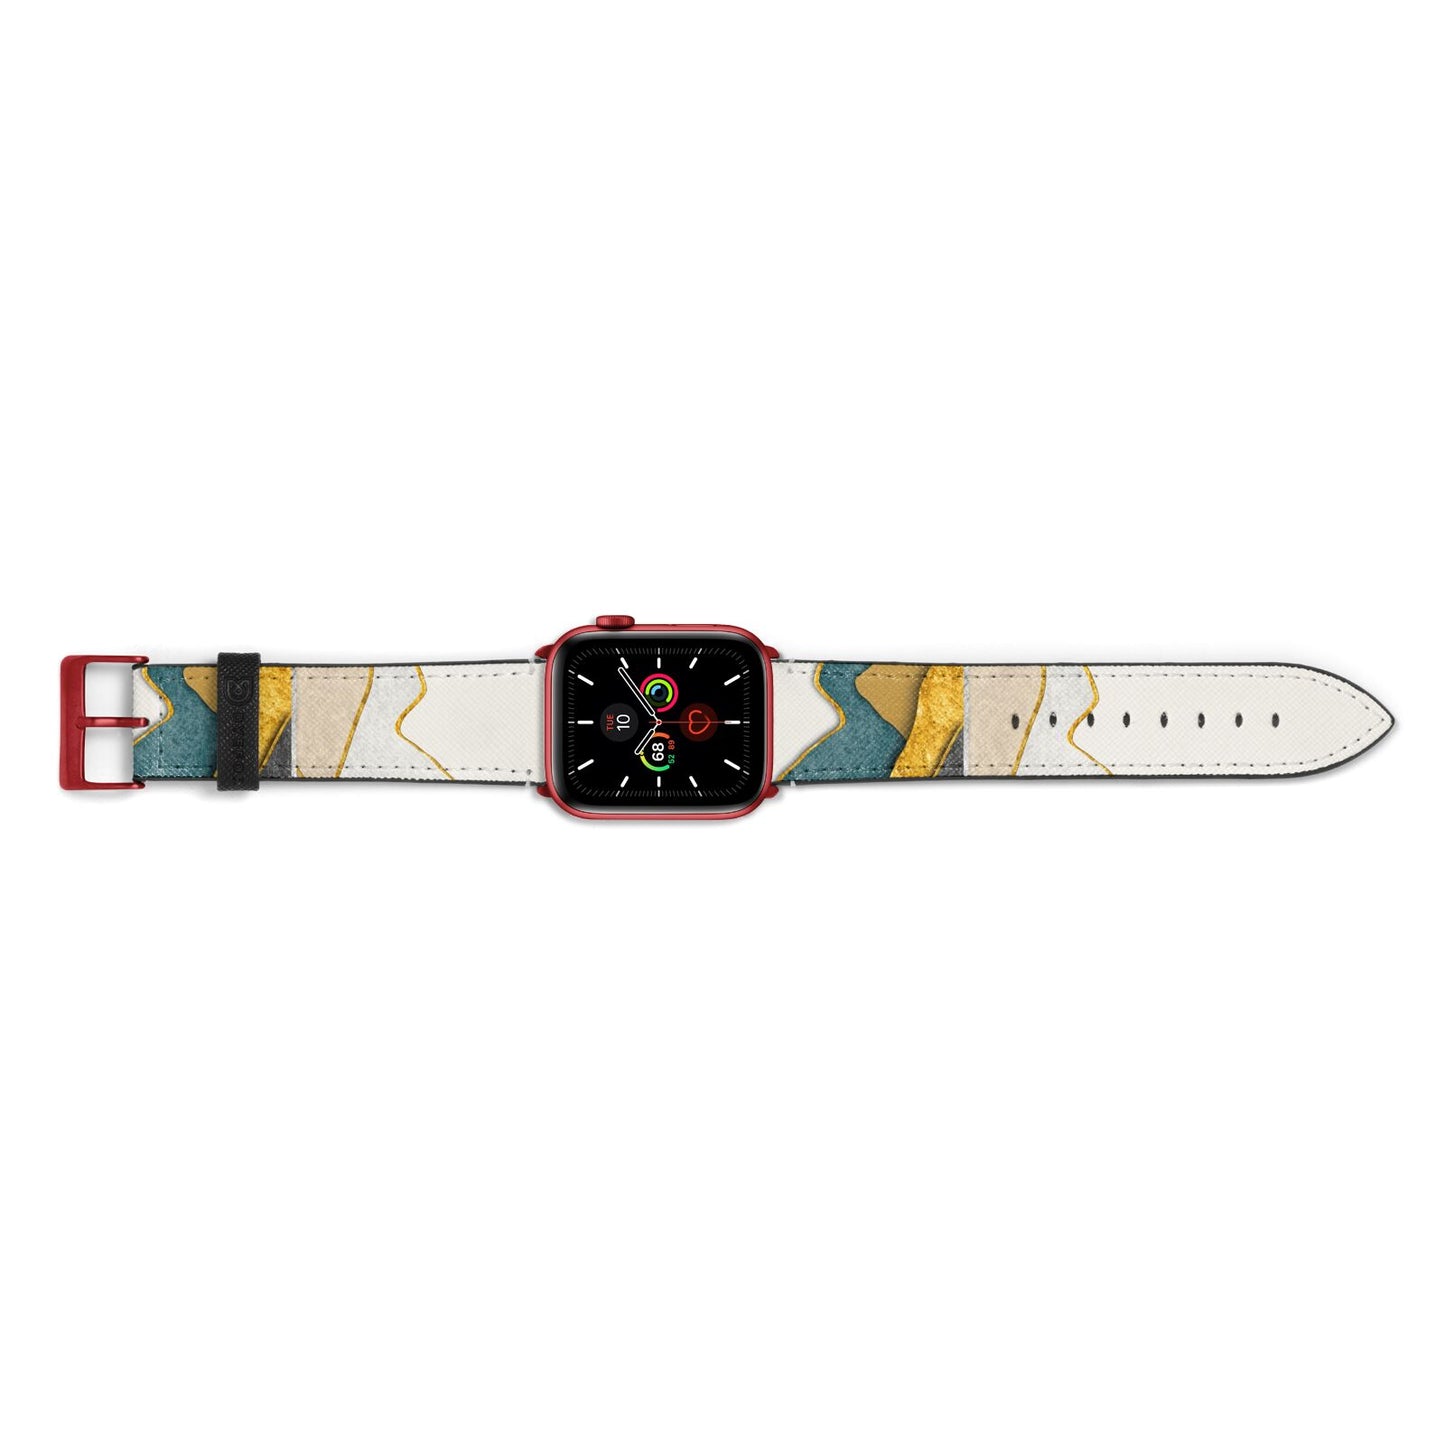 Abstract Mountain Apple Watch Strap Landscape Image Red Hardware